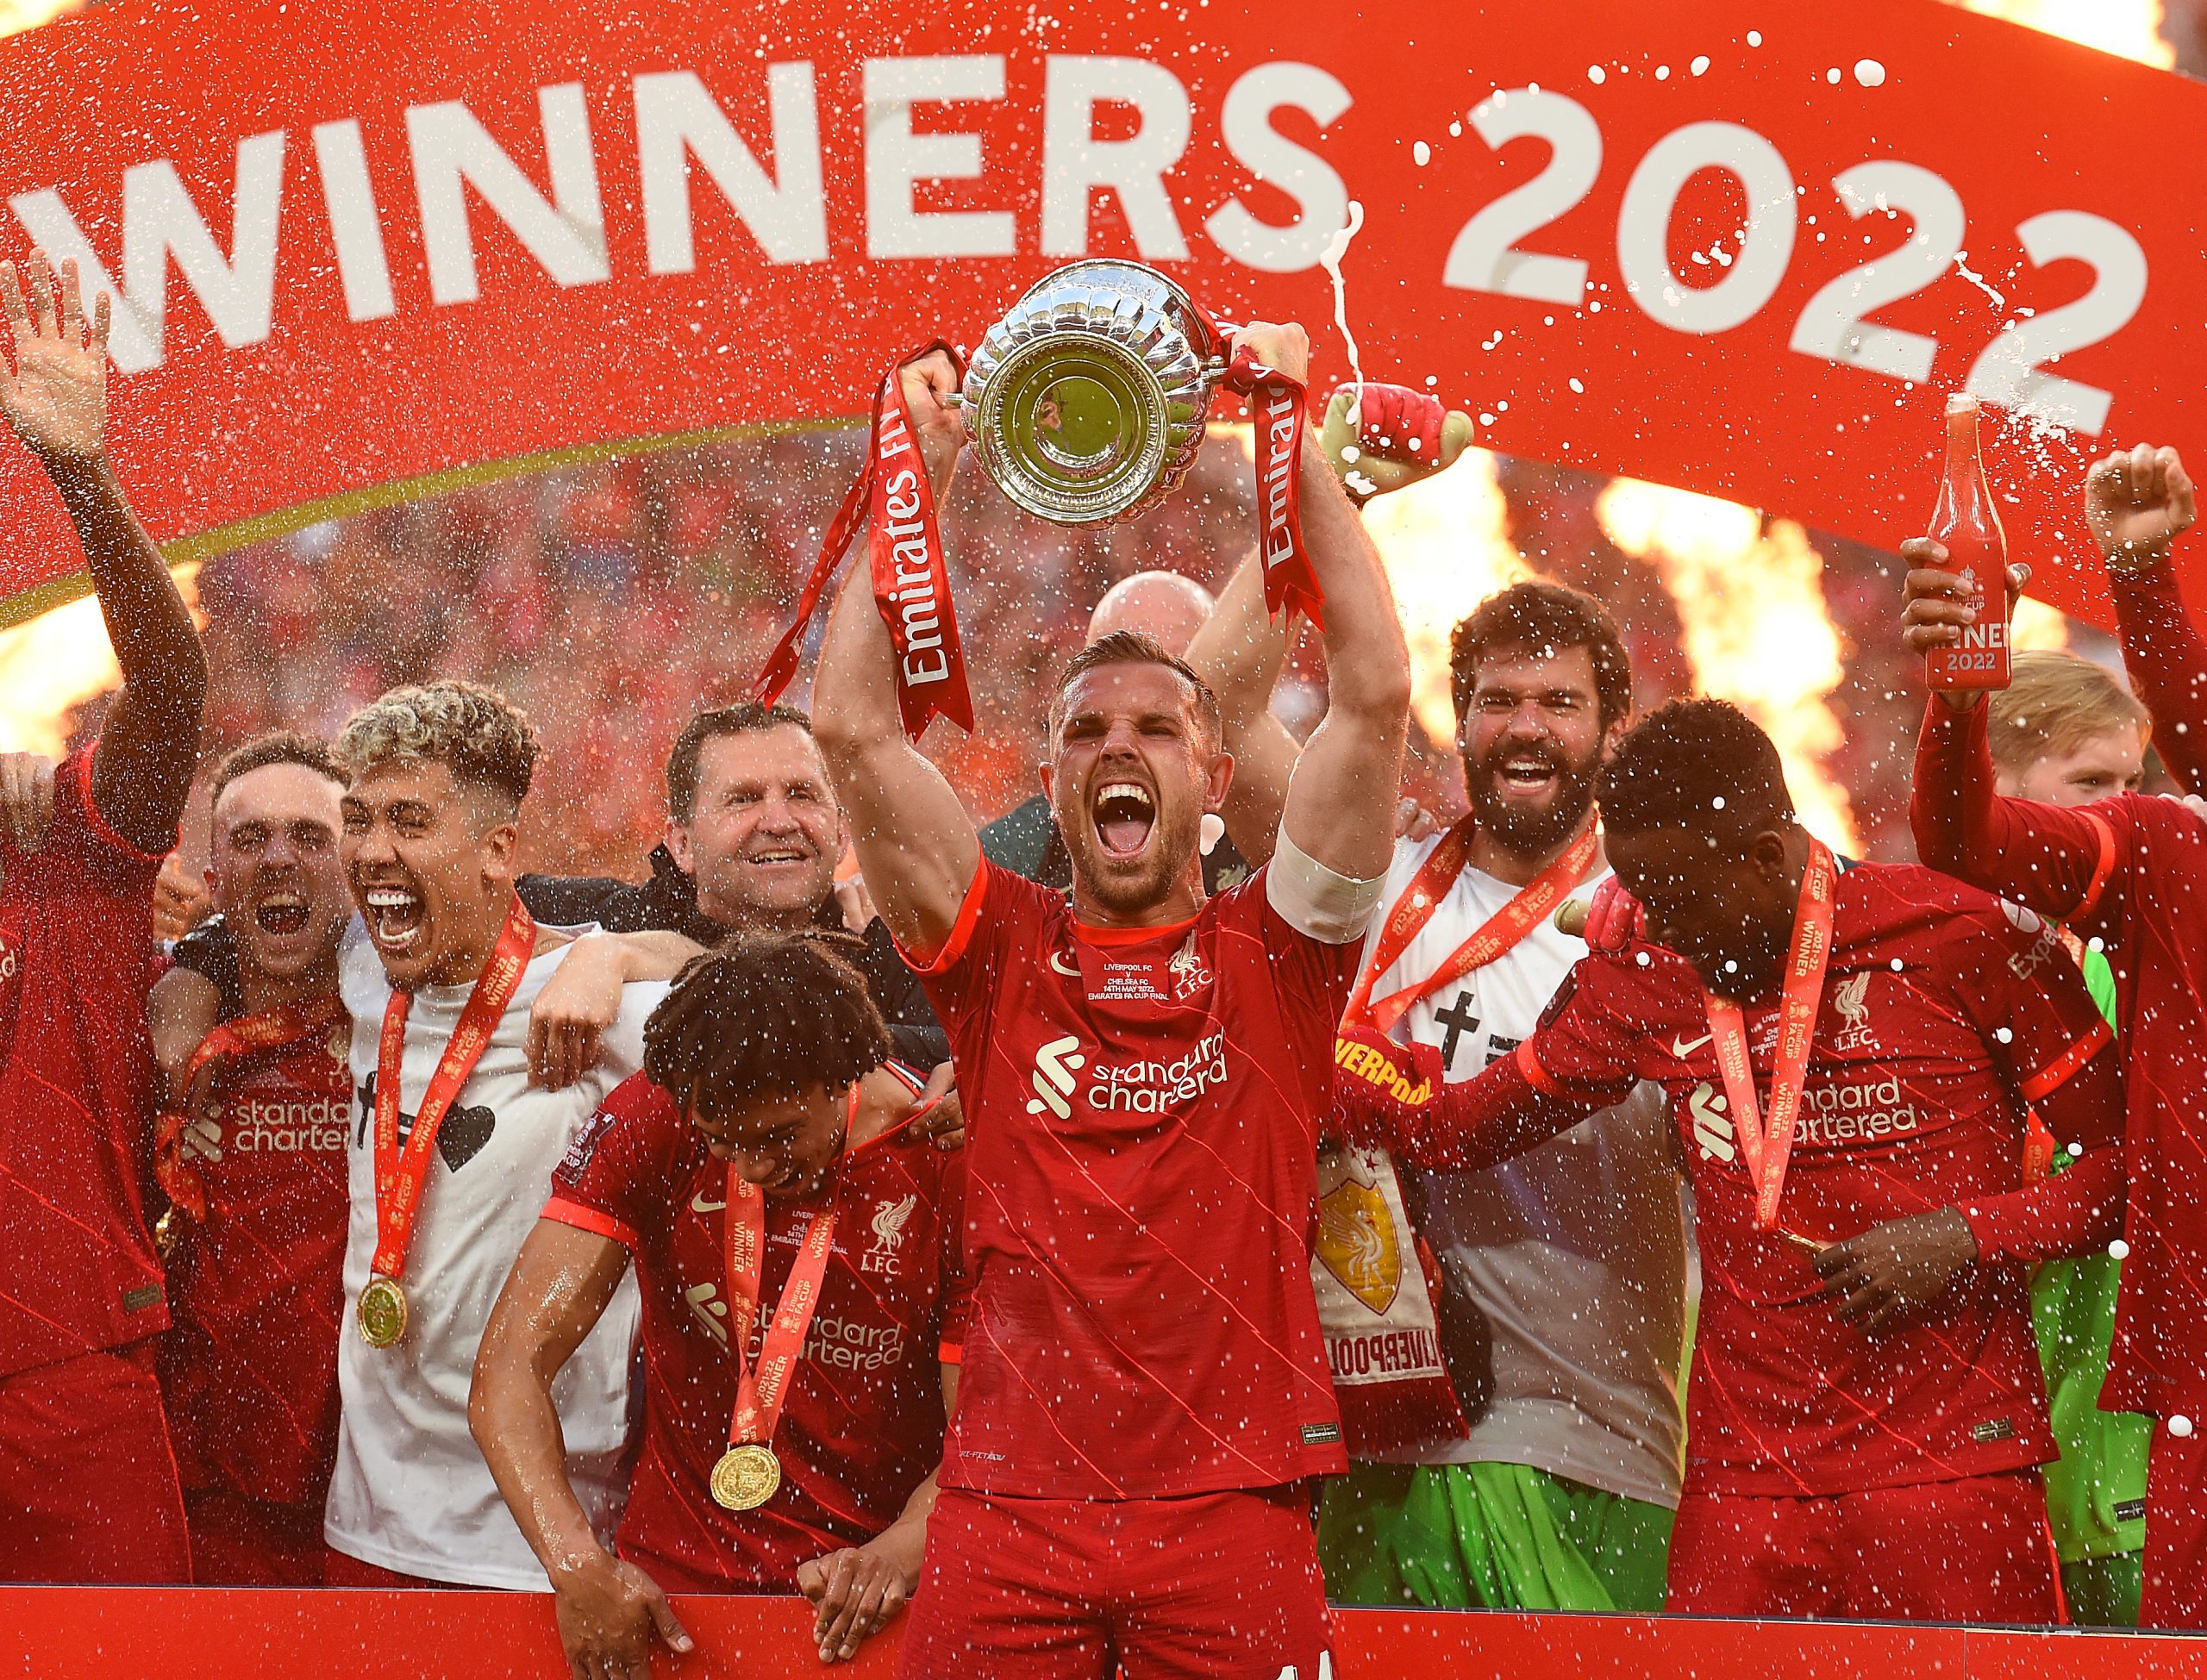 Liverpool win 2022 FA cup, defeating Chelsea in a 65 penalty shootout